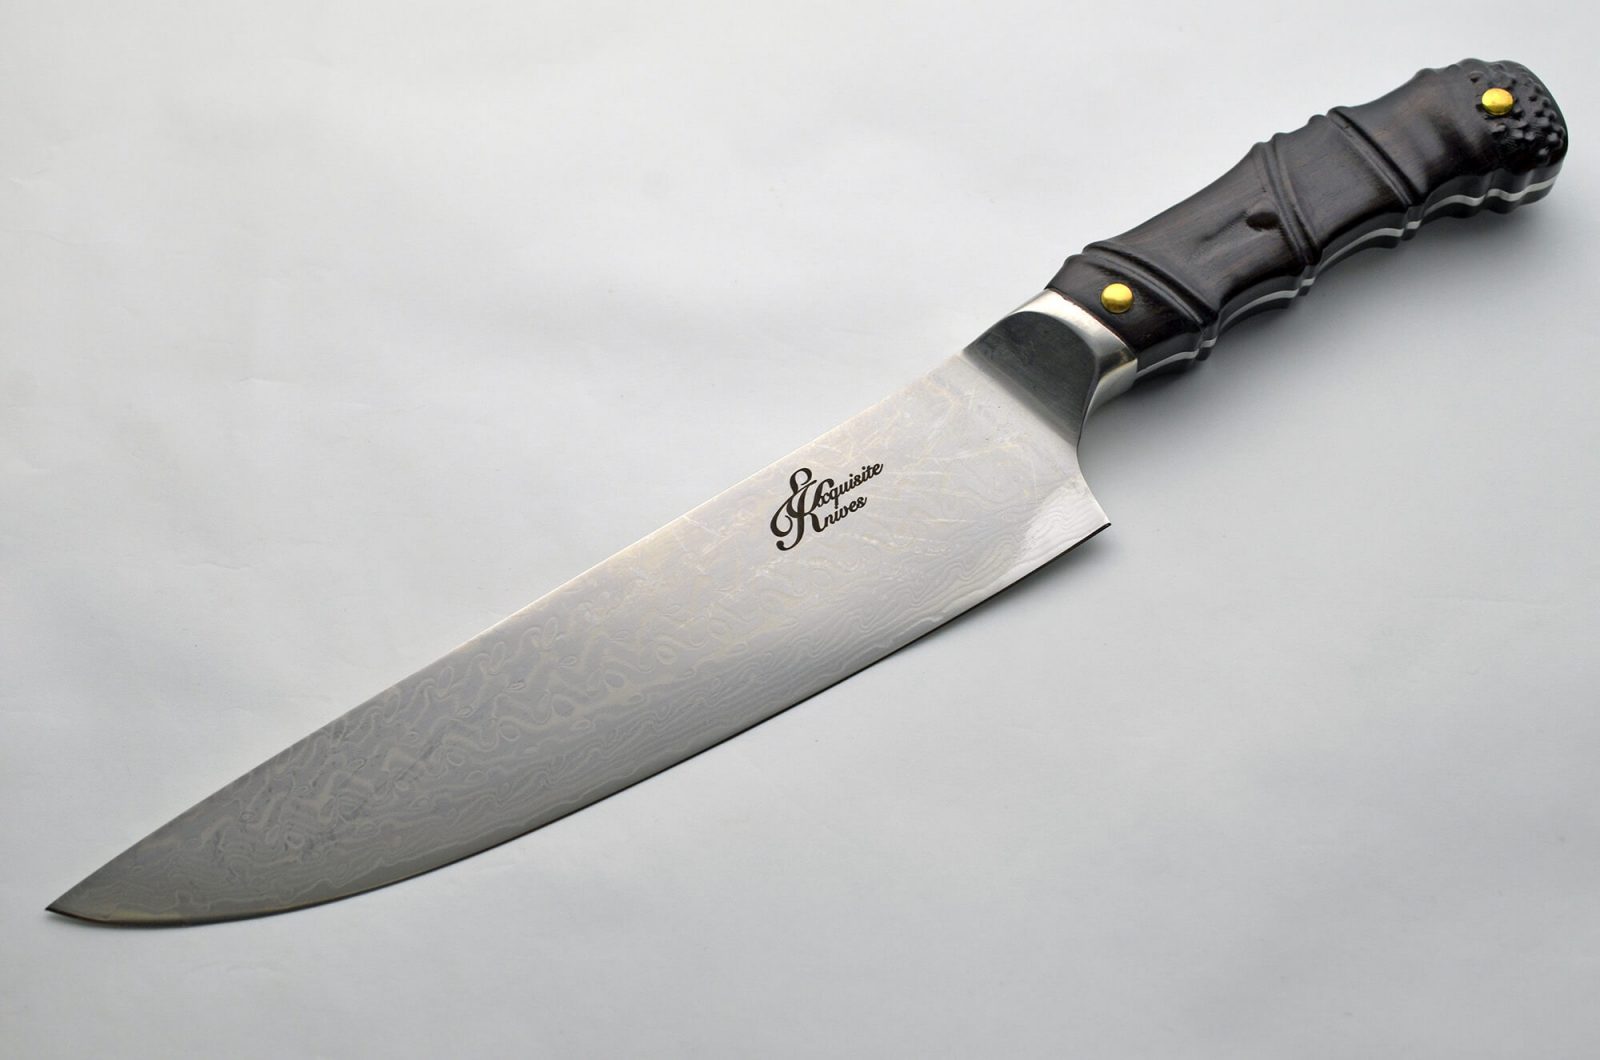 kitchen knife with design on blade